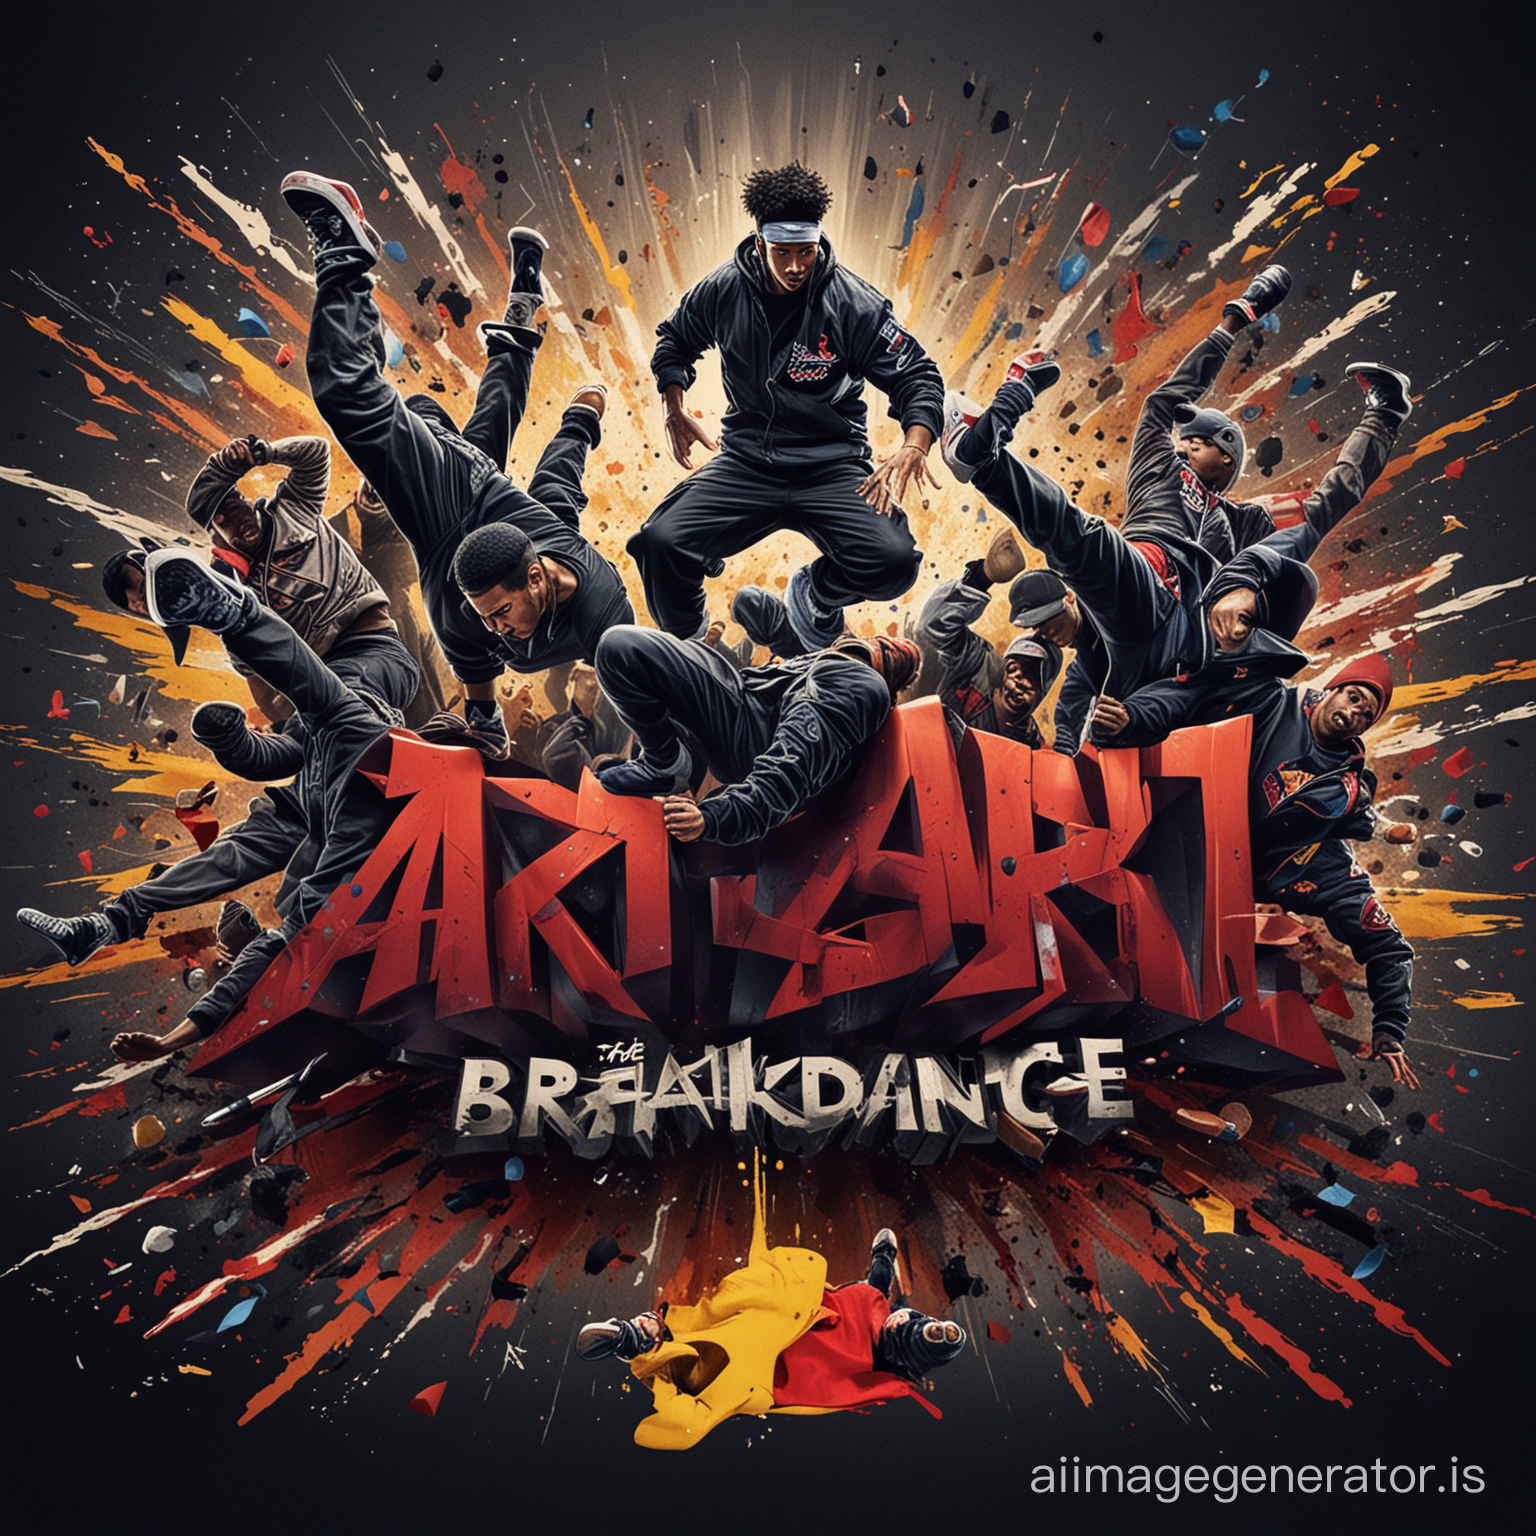  A striking movie poster for "The Art of BREAKDANCE" features a diverse group of REDBULL BC ONE icons, each holding a unique work of art that symbolizes their respective movements and struggles. The background is an energetic and bold black gredient, with a mix of abstract and realistic art styles. The overall atmosphere of the poster is inspiring and empowering, as it celebrates the power of art and creativity in the face of adversity.